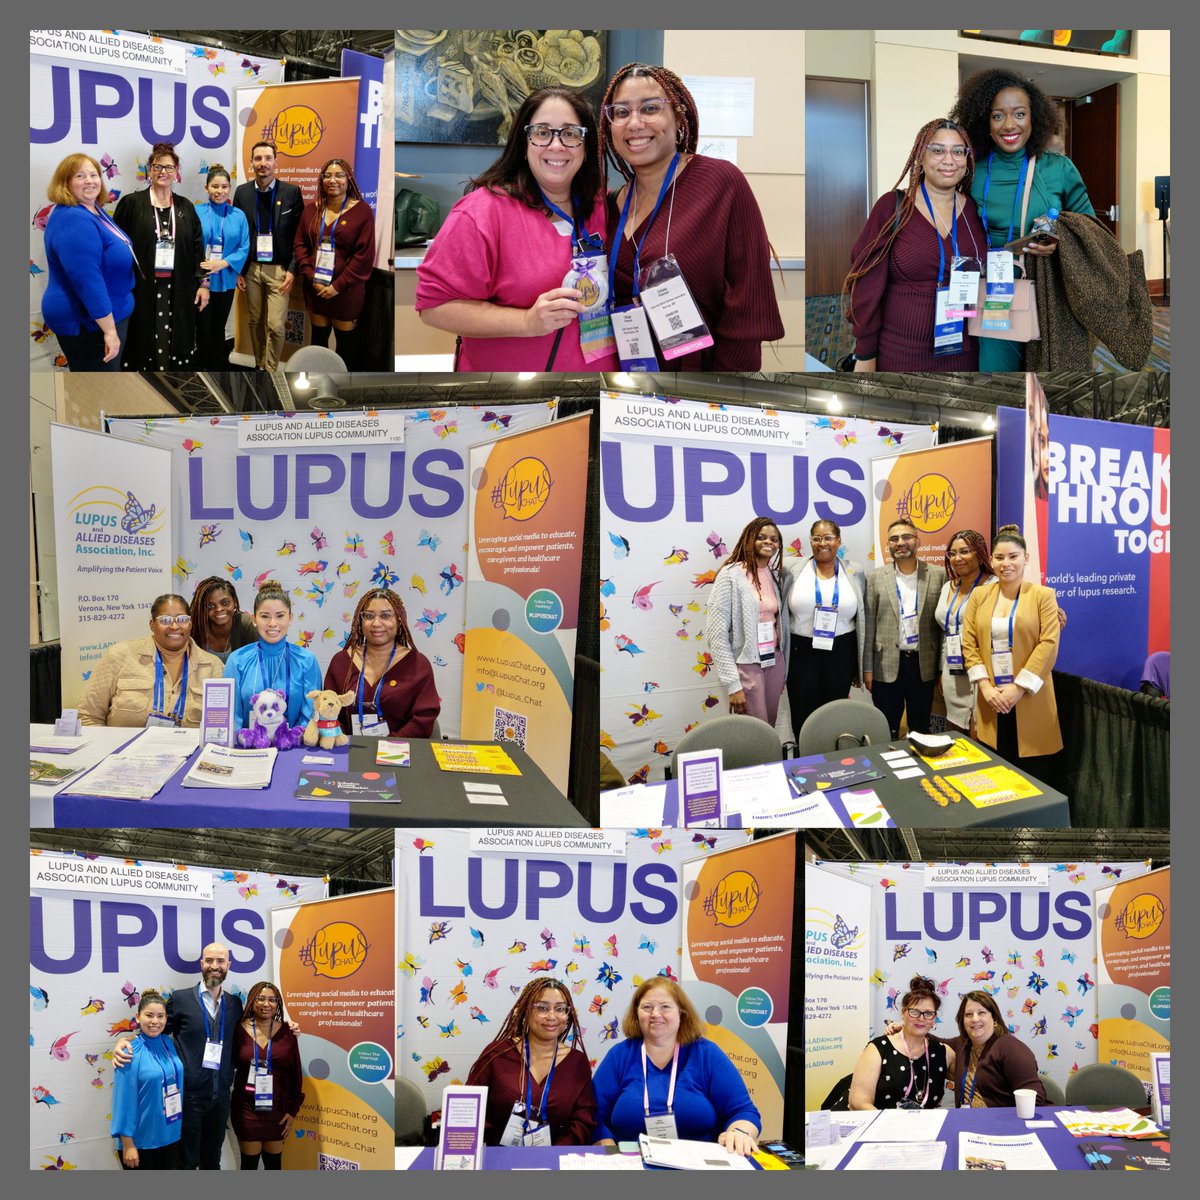 Highlights from day 2 at #ACR22 and…. GO!!
#LADAorg #Lupus #LupusChat